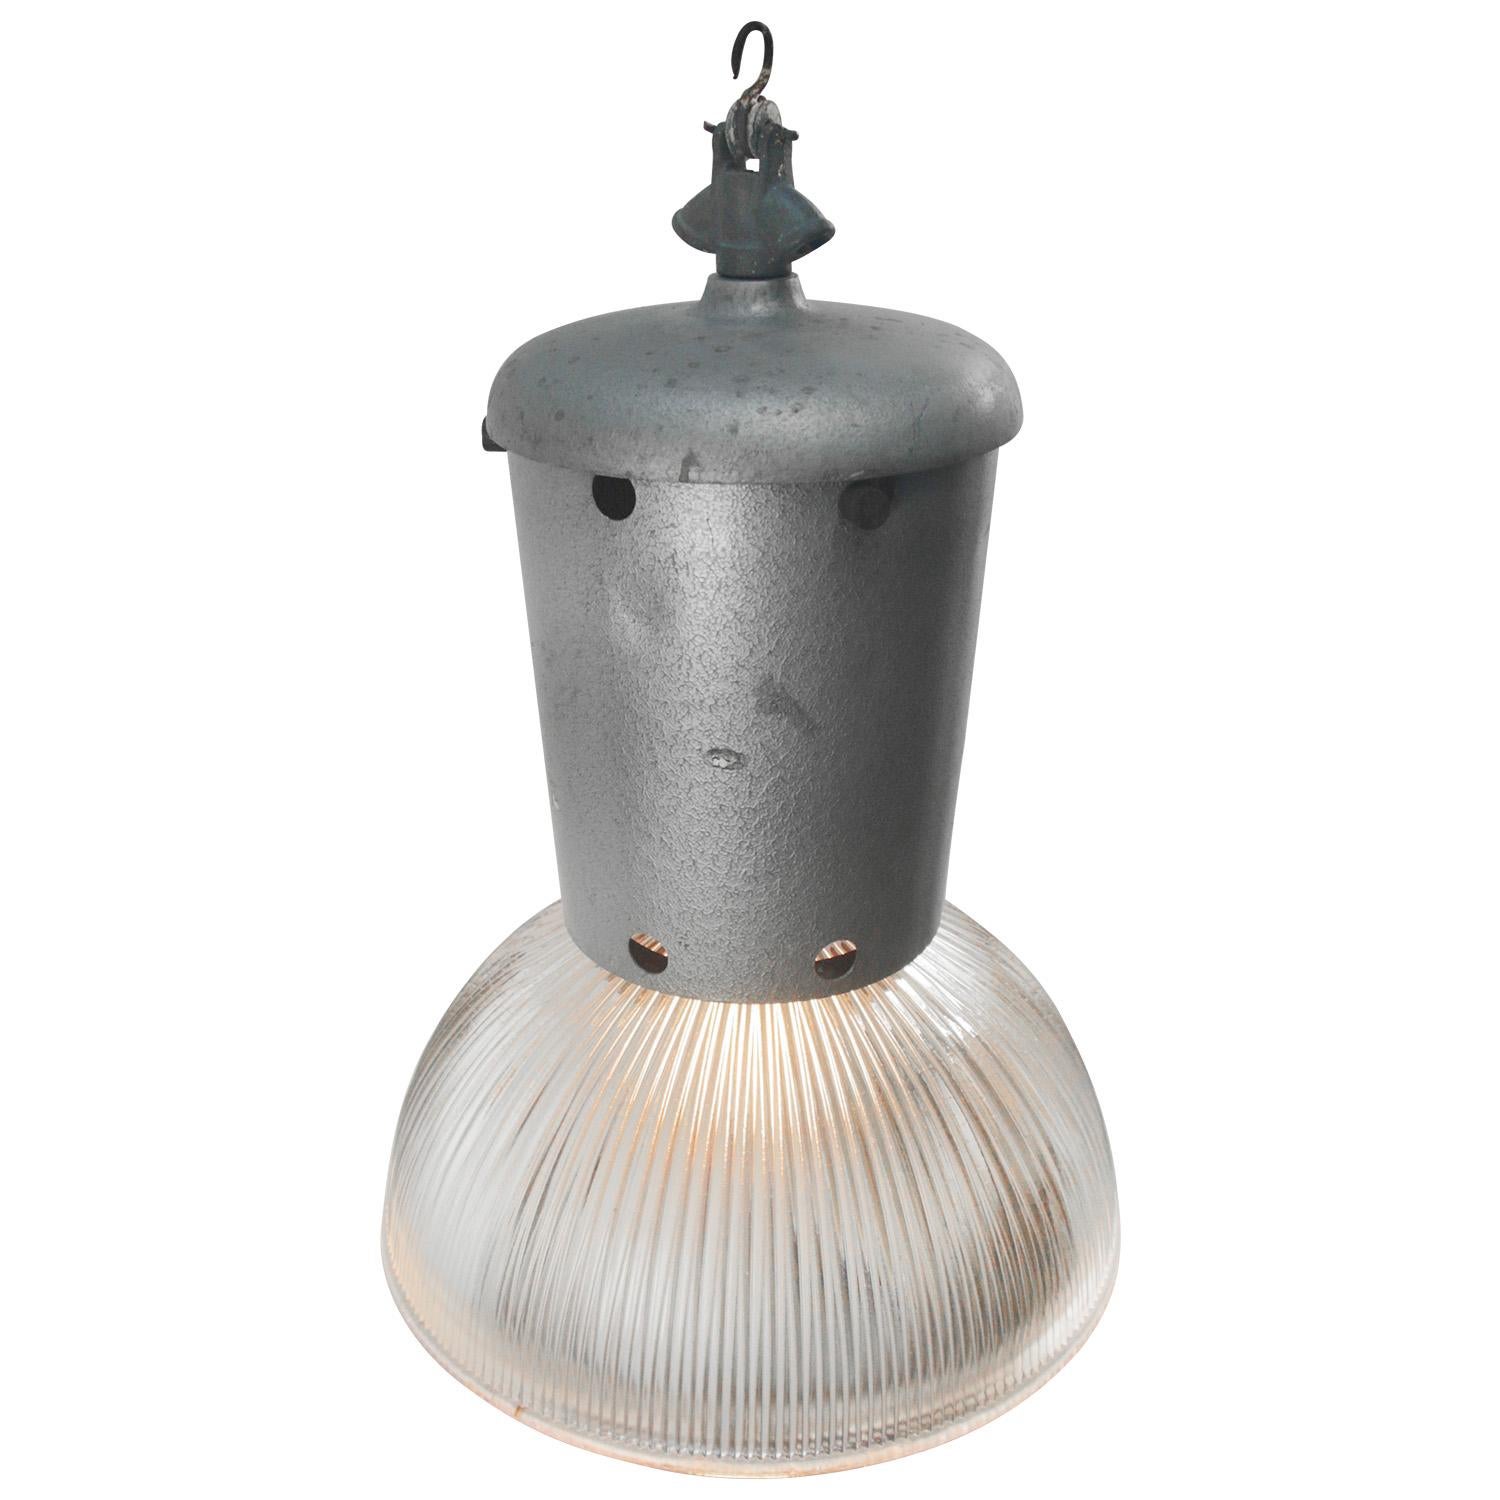 Factory hanging lamp
Grey metal top with clear striped / holophane glass

weight 4.60 kg / 10.1 lb

Priced per individual item. All lamps have been made suitable by international standards for incandescent light bulbs, energy-efficient and LED